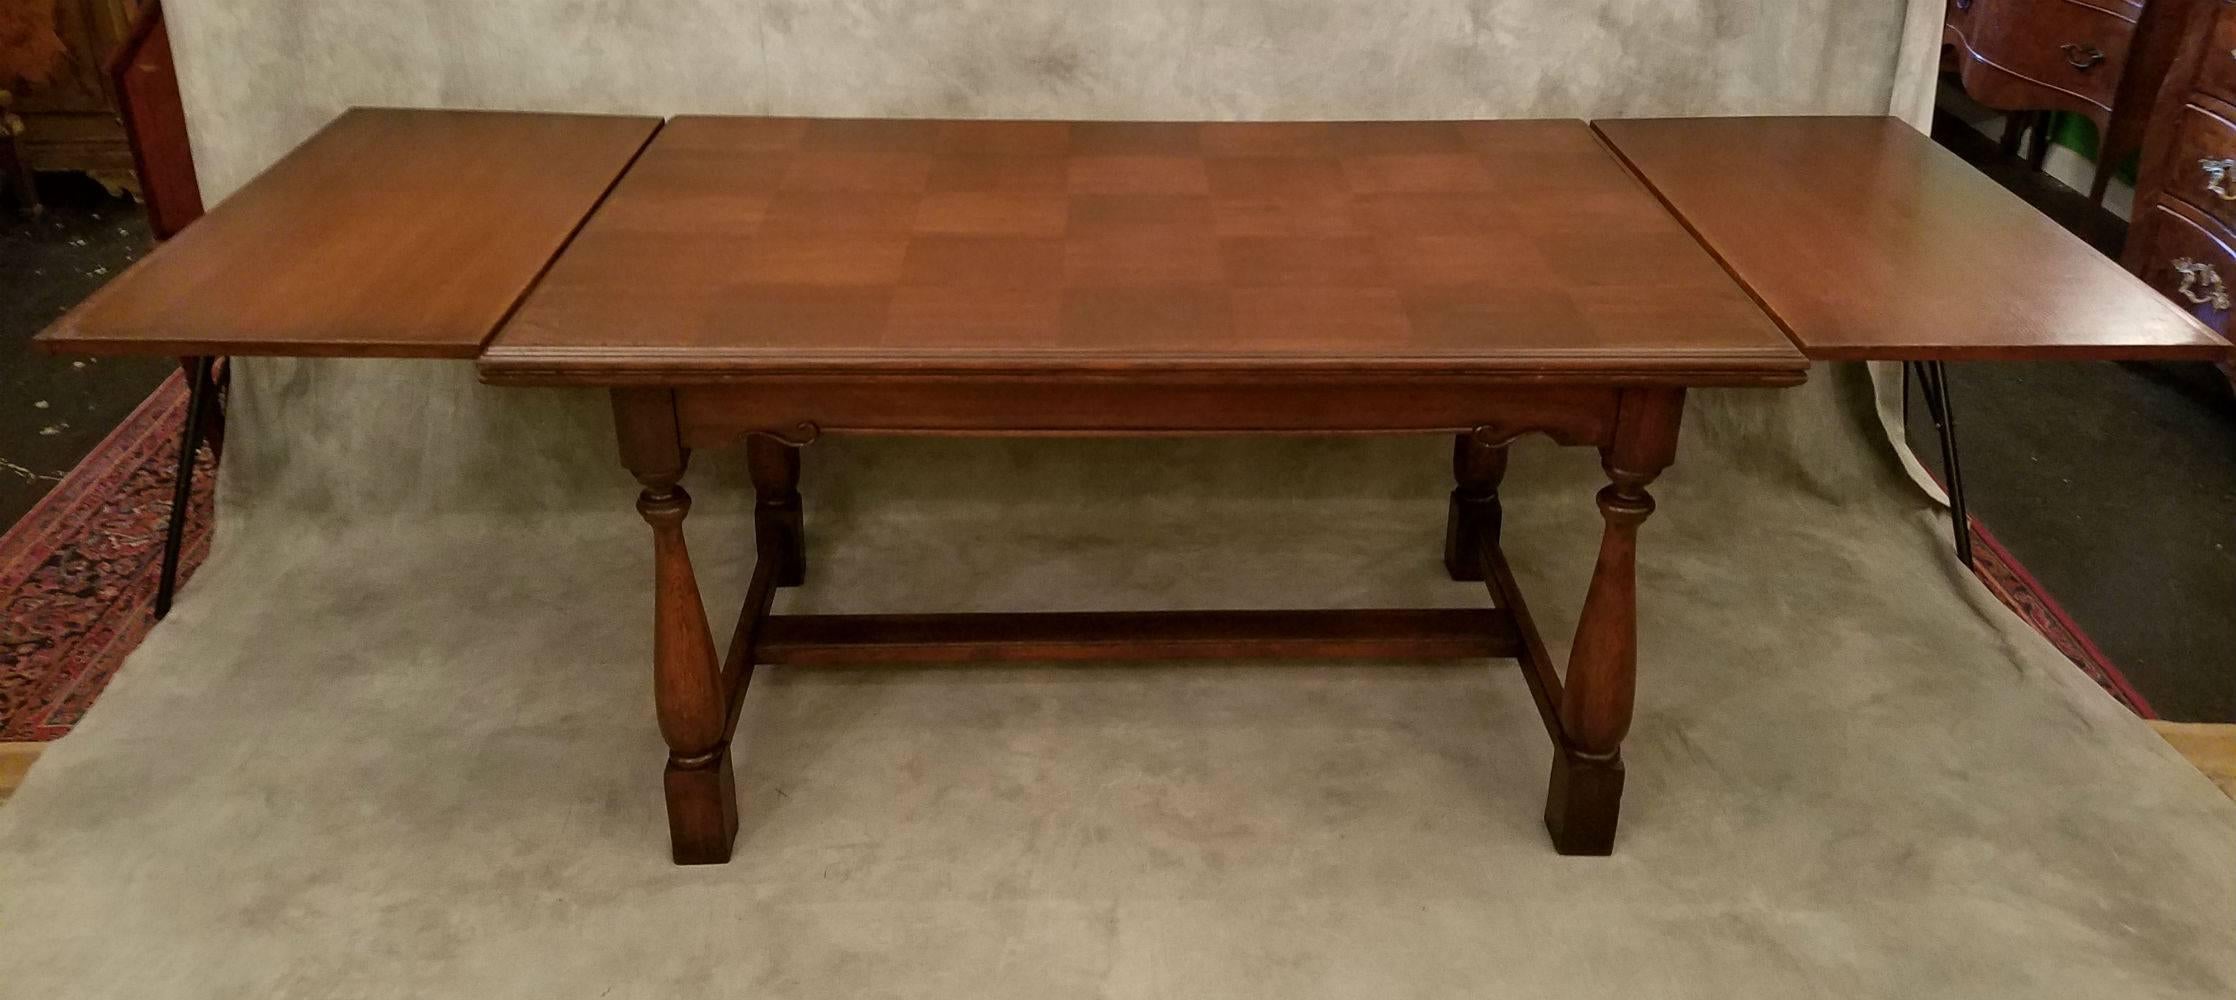 19th Century Antique Country French Carved Oak Refectory Dining Table with Parquetry Top For Sale